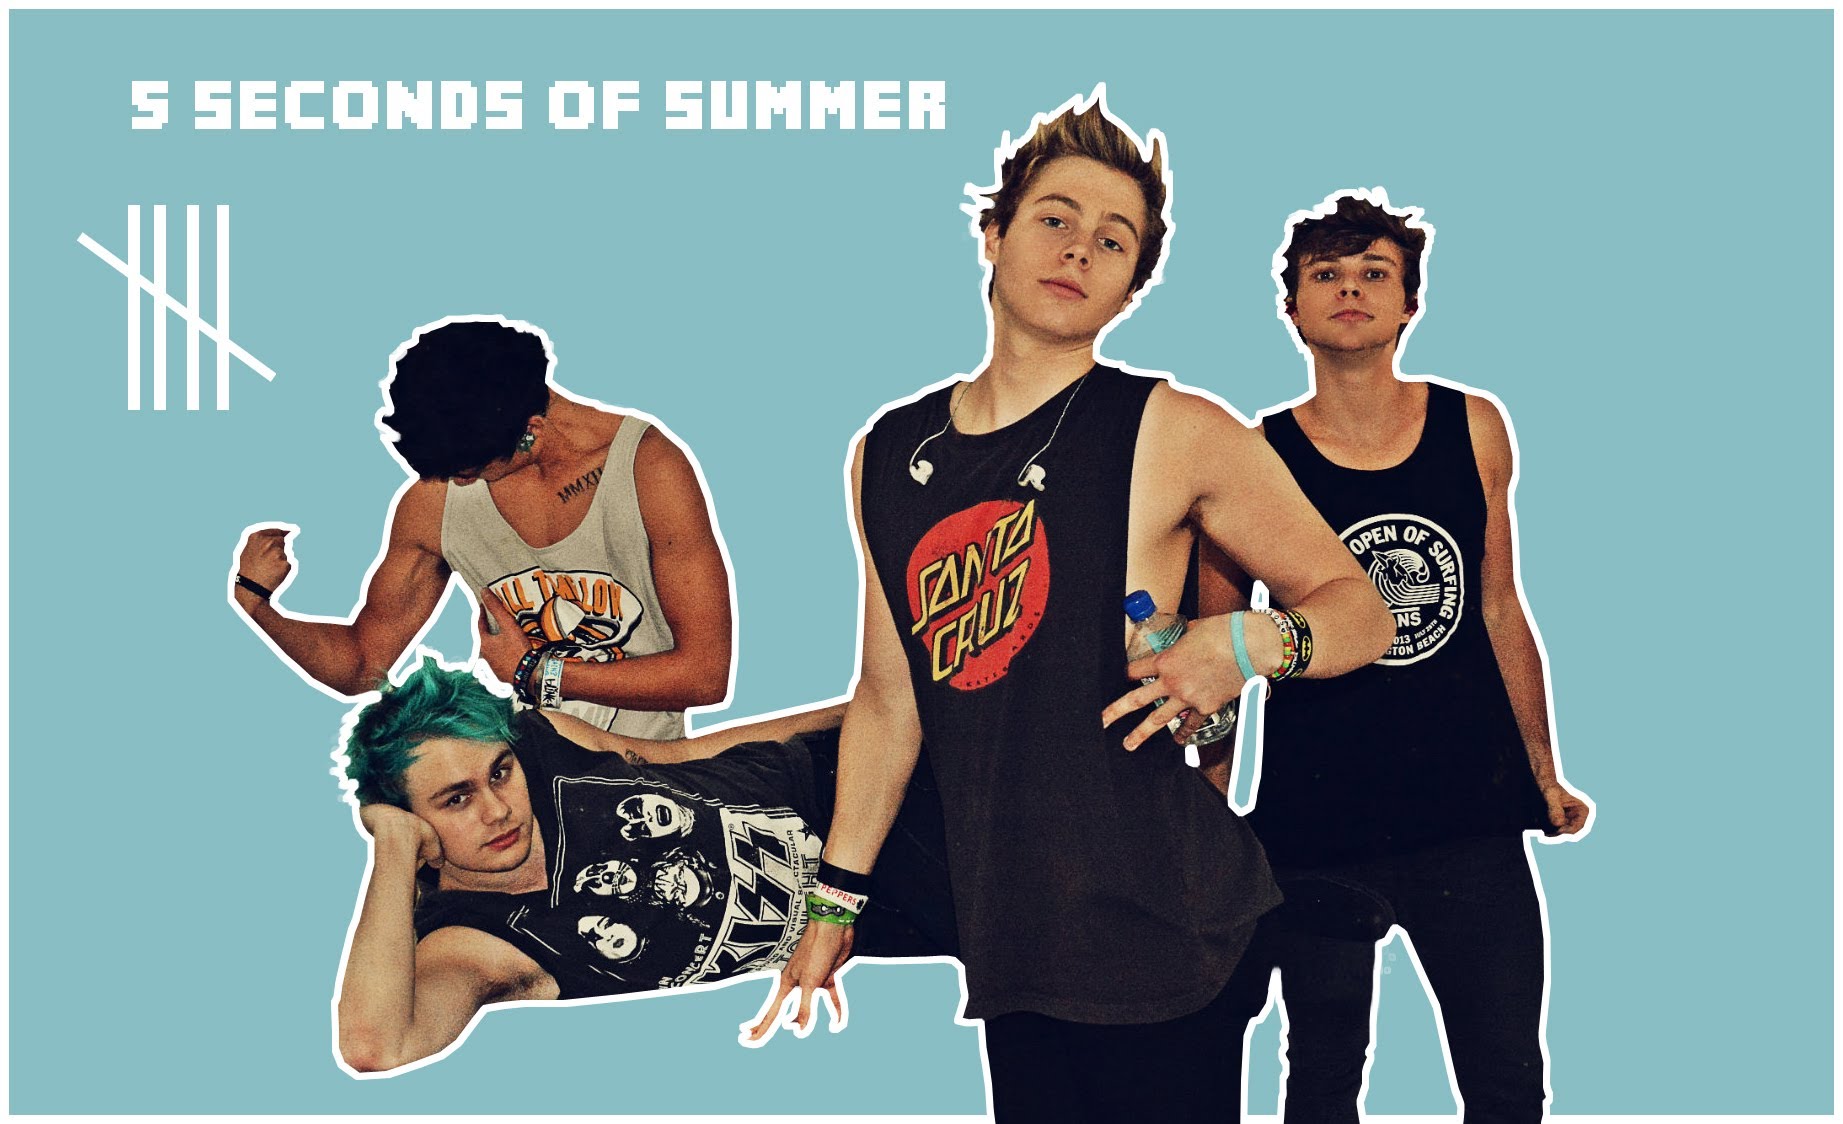 Free Download Photoshop Cs5 Speed Art 5 Seconds Of Summer Wallpaper 1843x1124 For Your Desktop Mobile Tablet Explore 38 5 Seconds Of Summer Wallpapers 5sos Wallpapers For Laptops 5sos